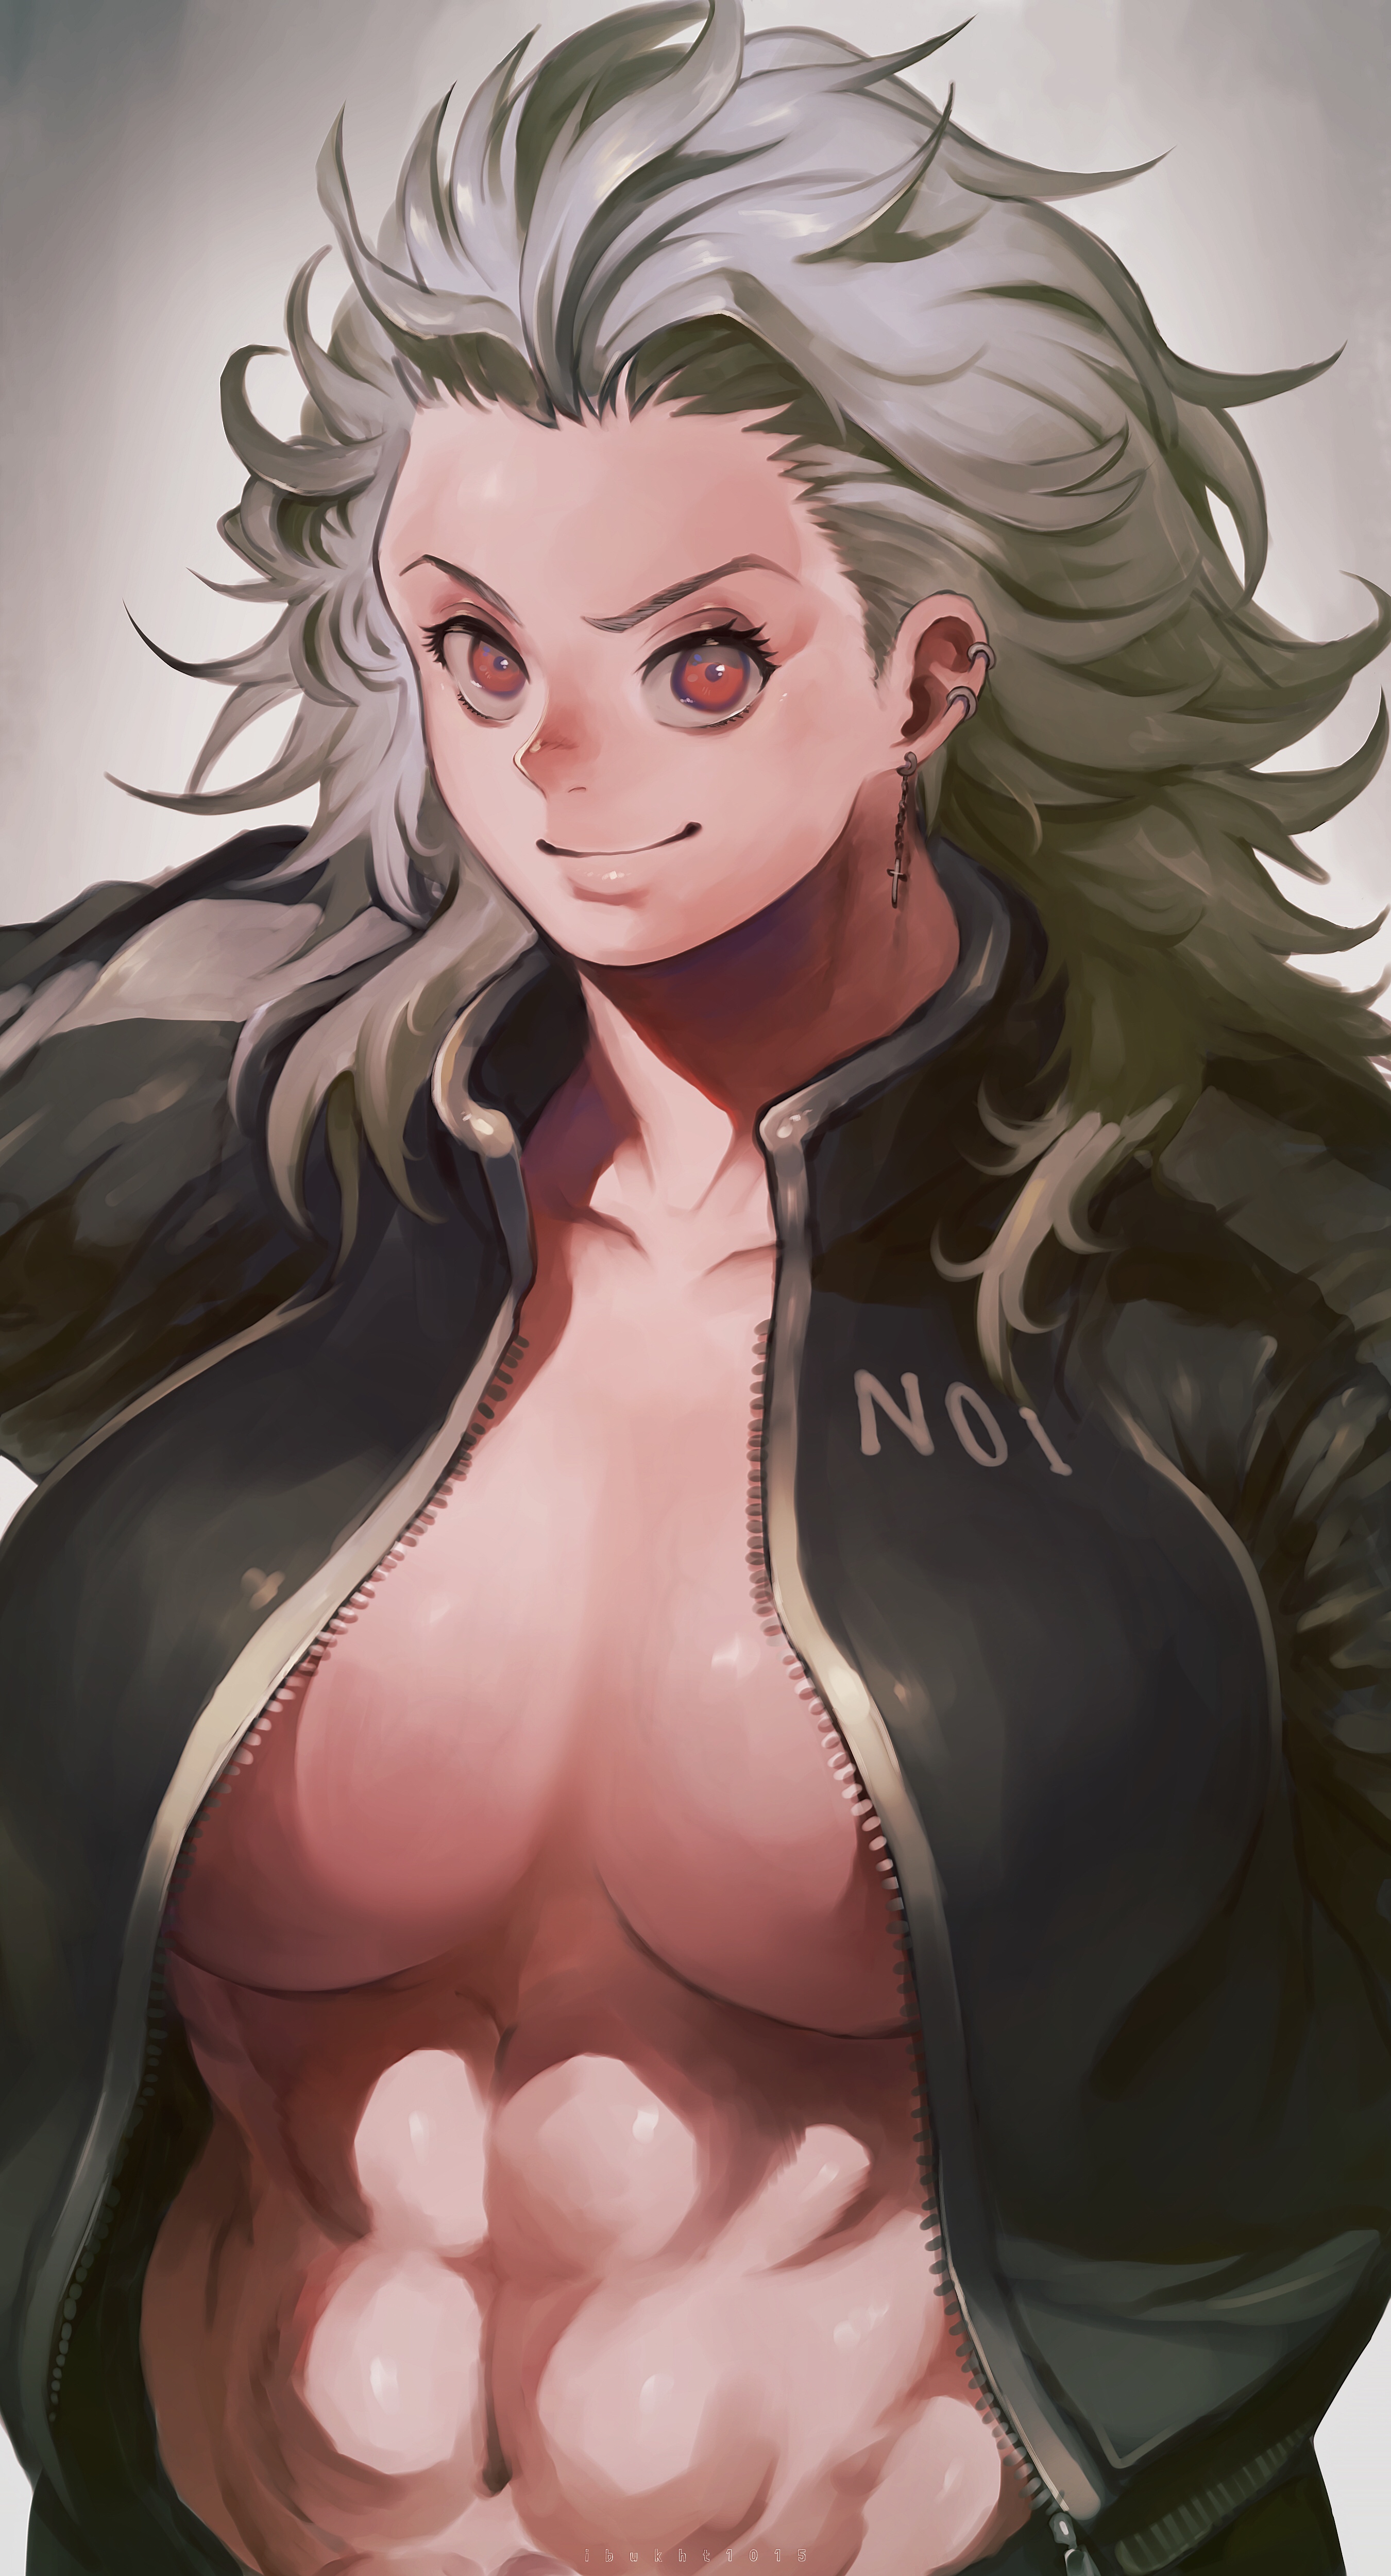 Anime 2700x5000 Dorohedoro anime girls big boobs 2D cleavage no bra long hair gray hair fan art smiling looking at viewer simple background belly button muscular 6-pack abs black jackets Noi (Dorohedoro) portrait display red eyes anime